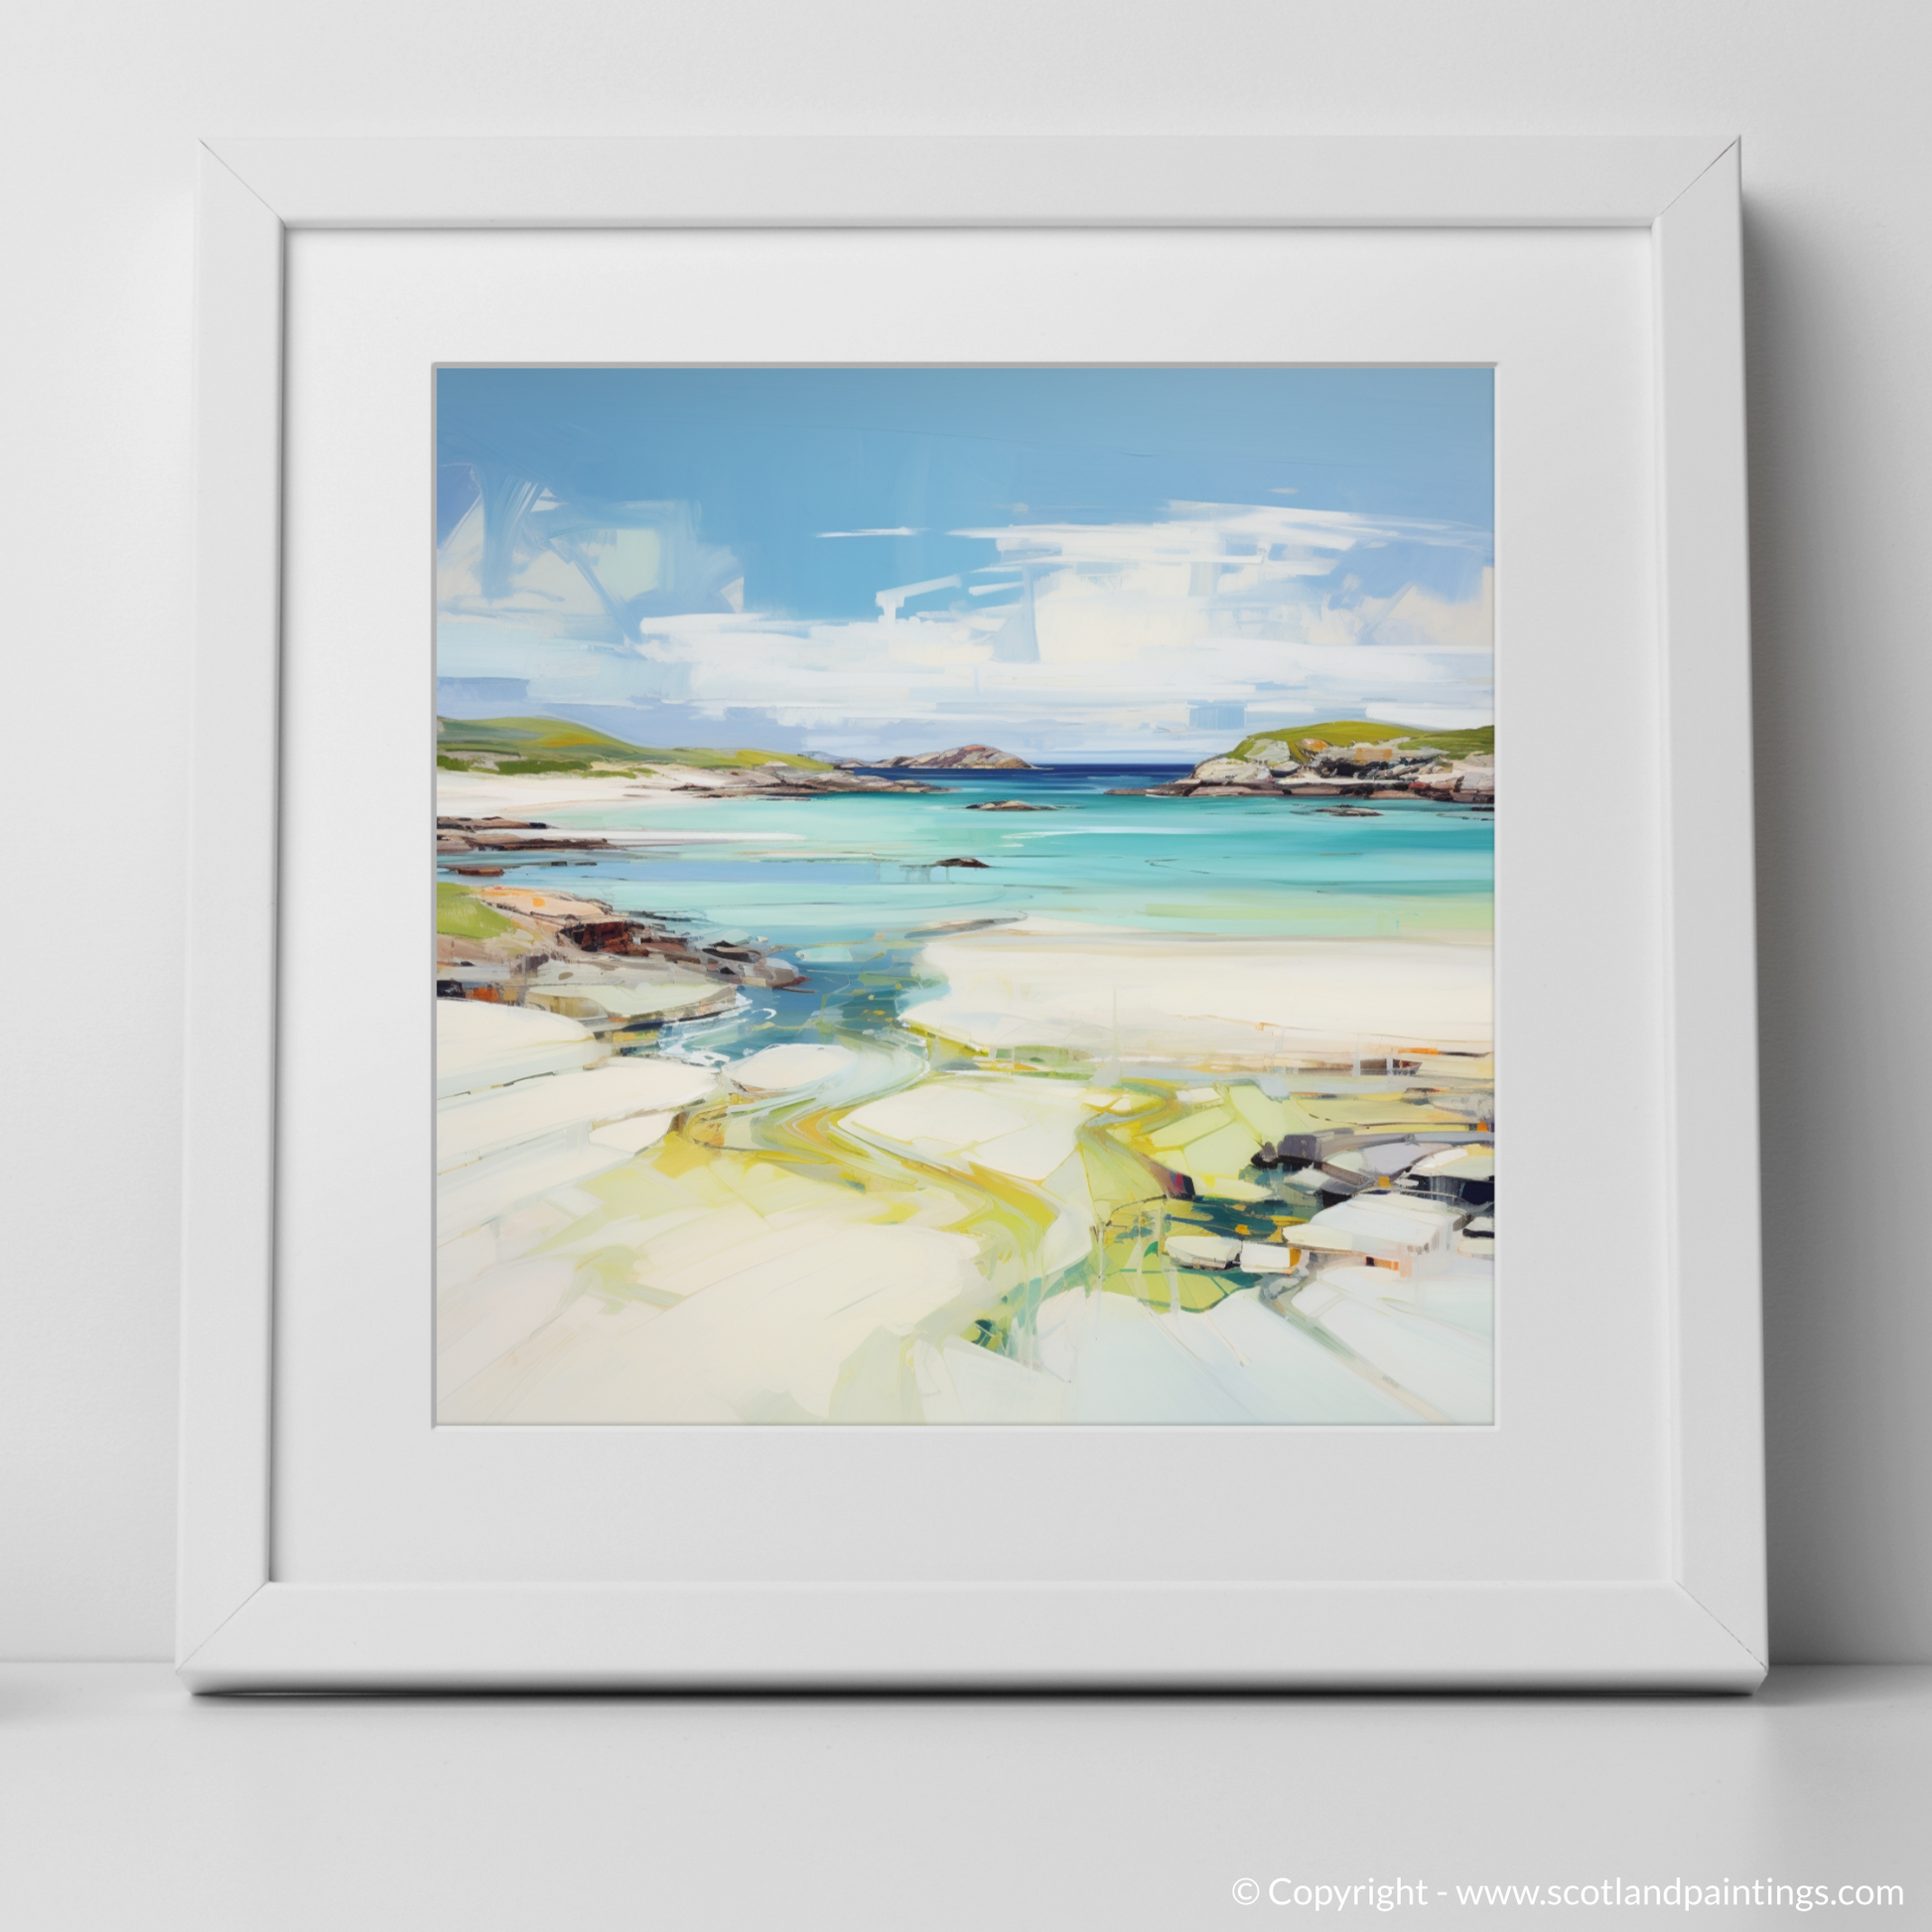 Art Print of Isle of Barra, Outer Hebrides in summer with a white frame